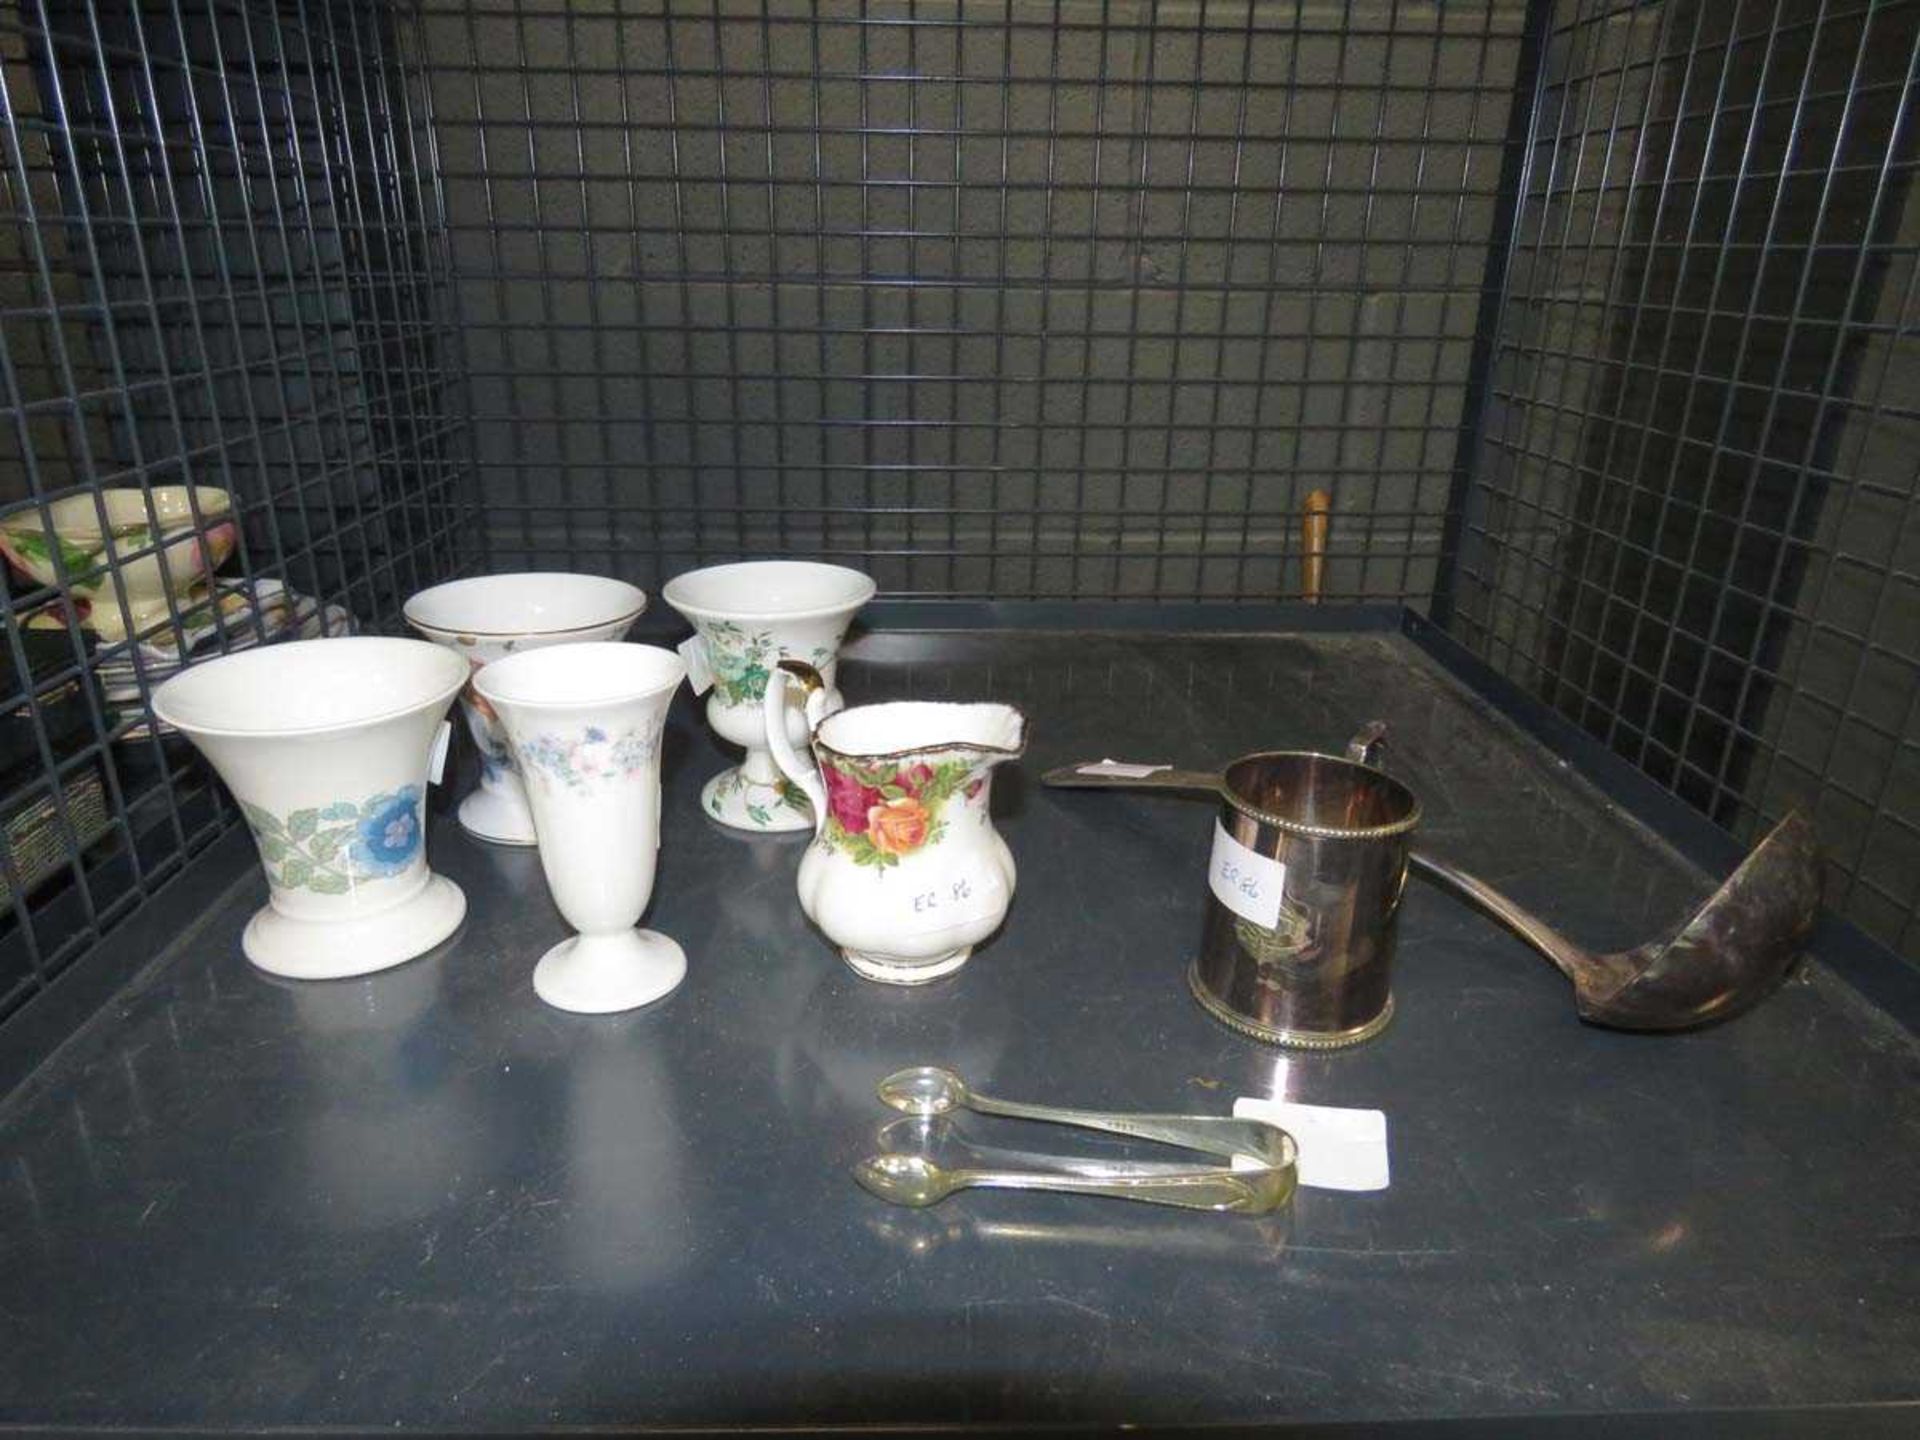 Cage containing sugar nibs, ladle, mug plus Wedgewood, Royal Albert and other vases